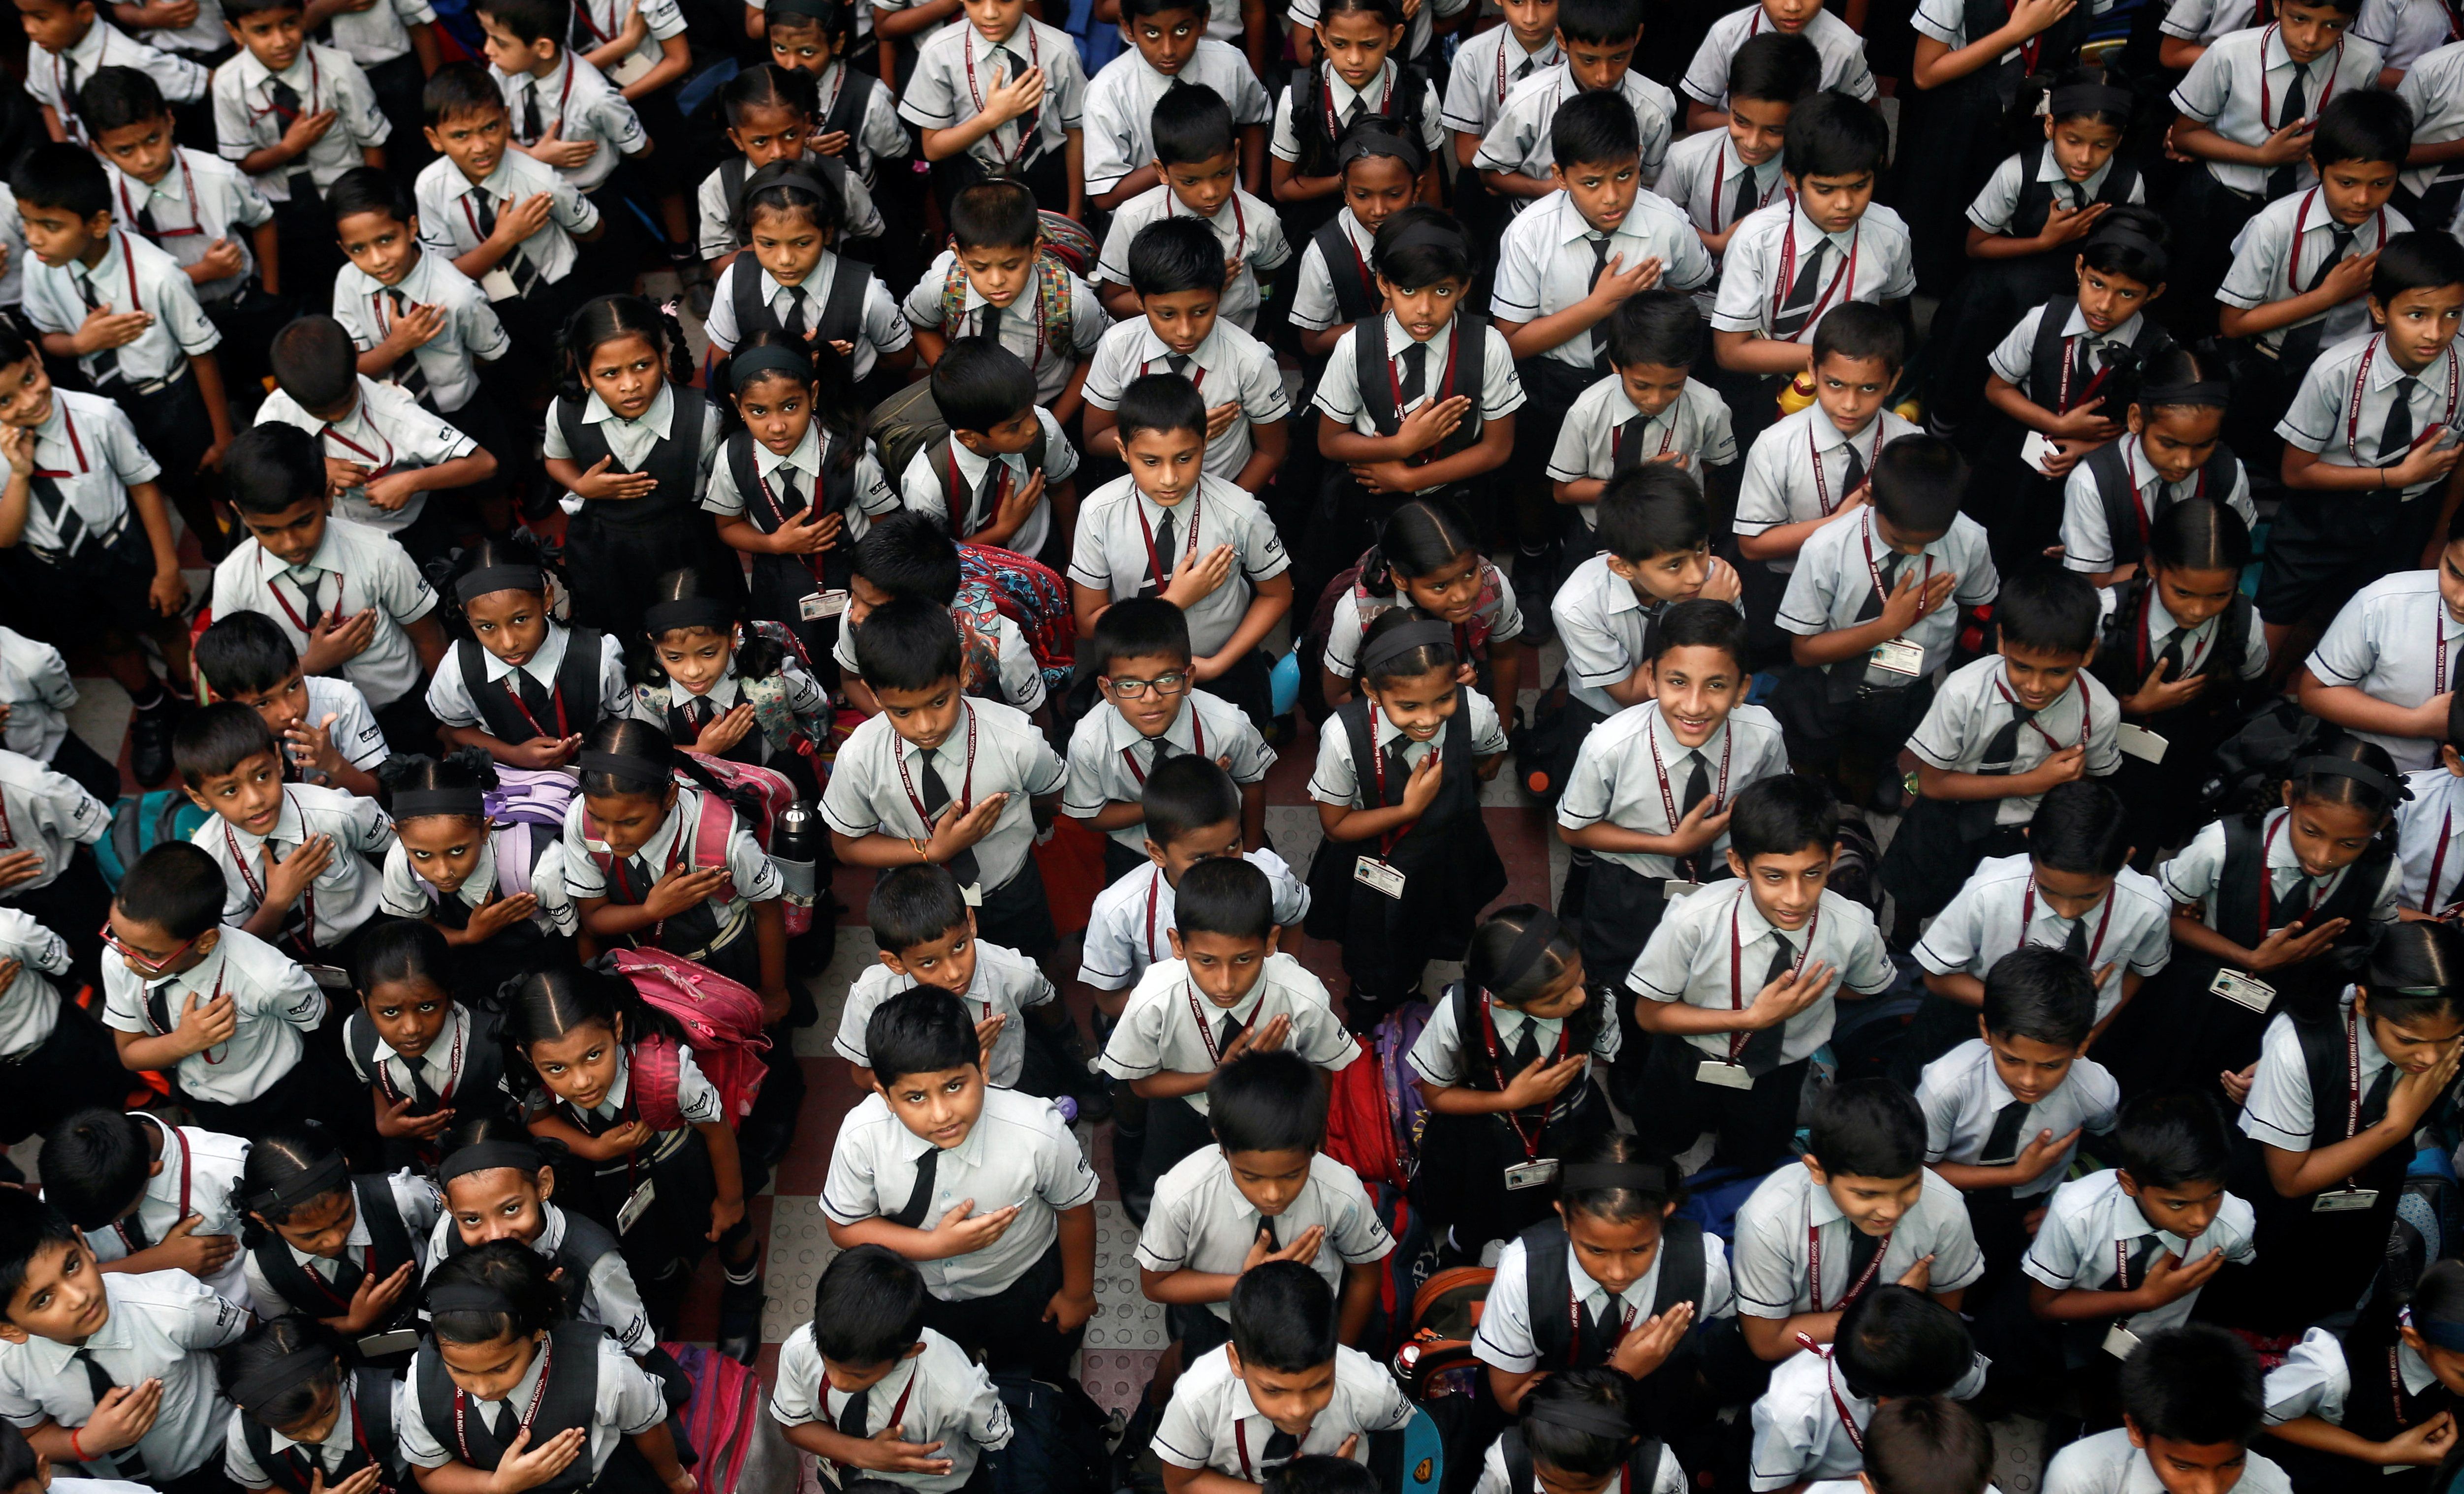 To fix the education system that’s failing its children, India must think of pre-school learning